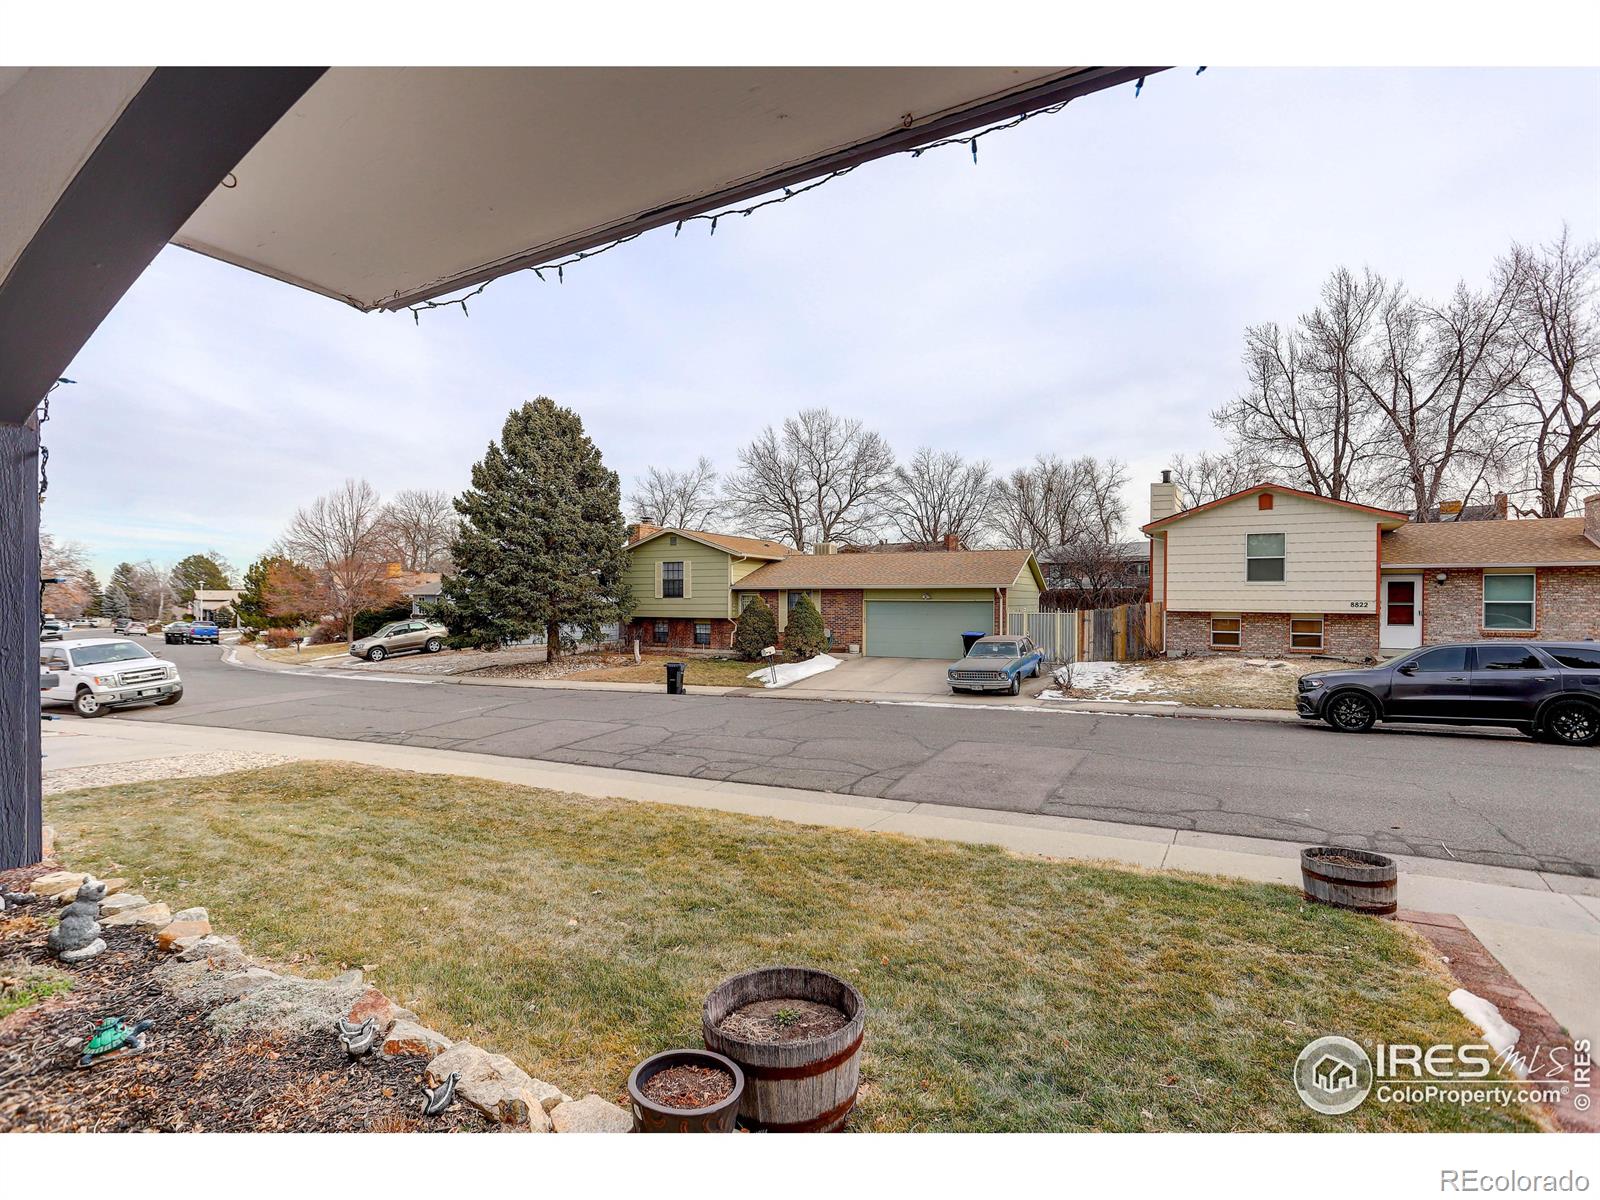 Report Image for 8849 W 75th Place,Arvada, Colorado